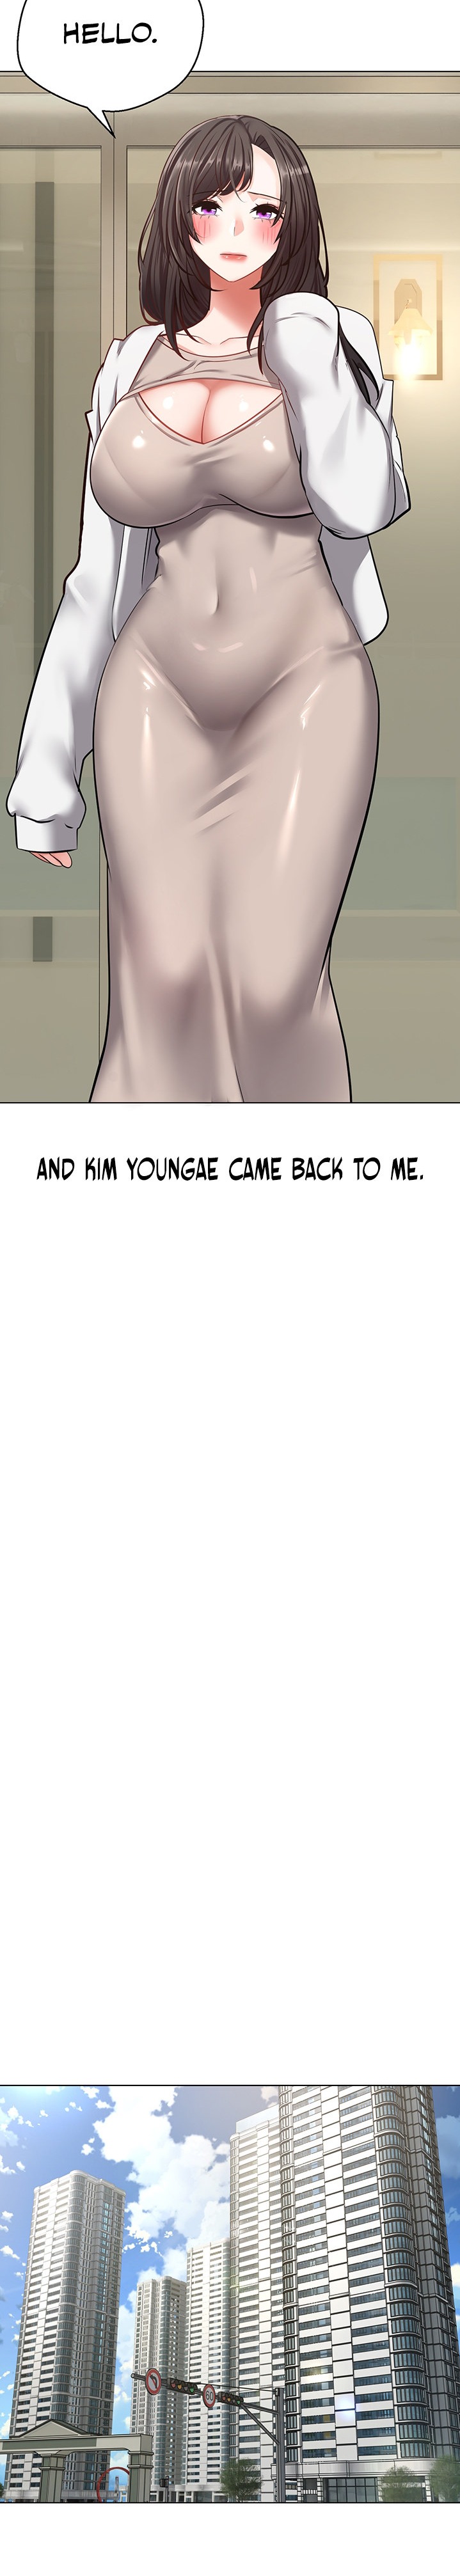 Desire Realization App - Chapter 12 Page 9